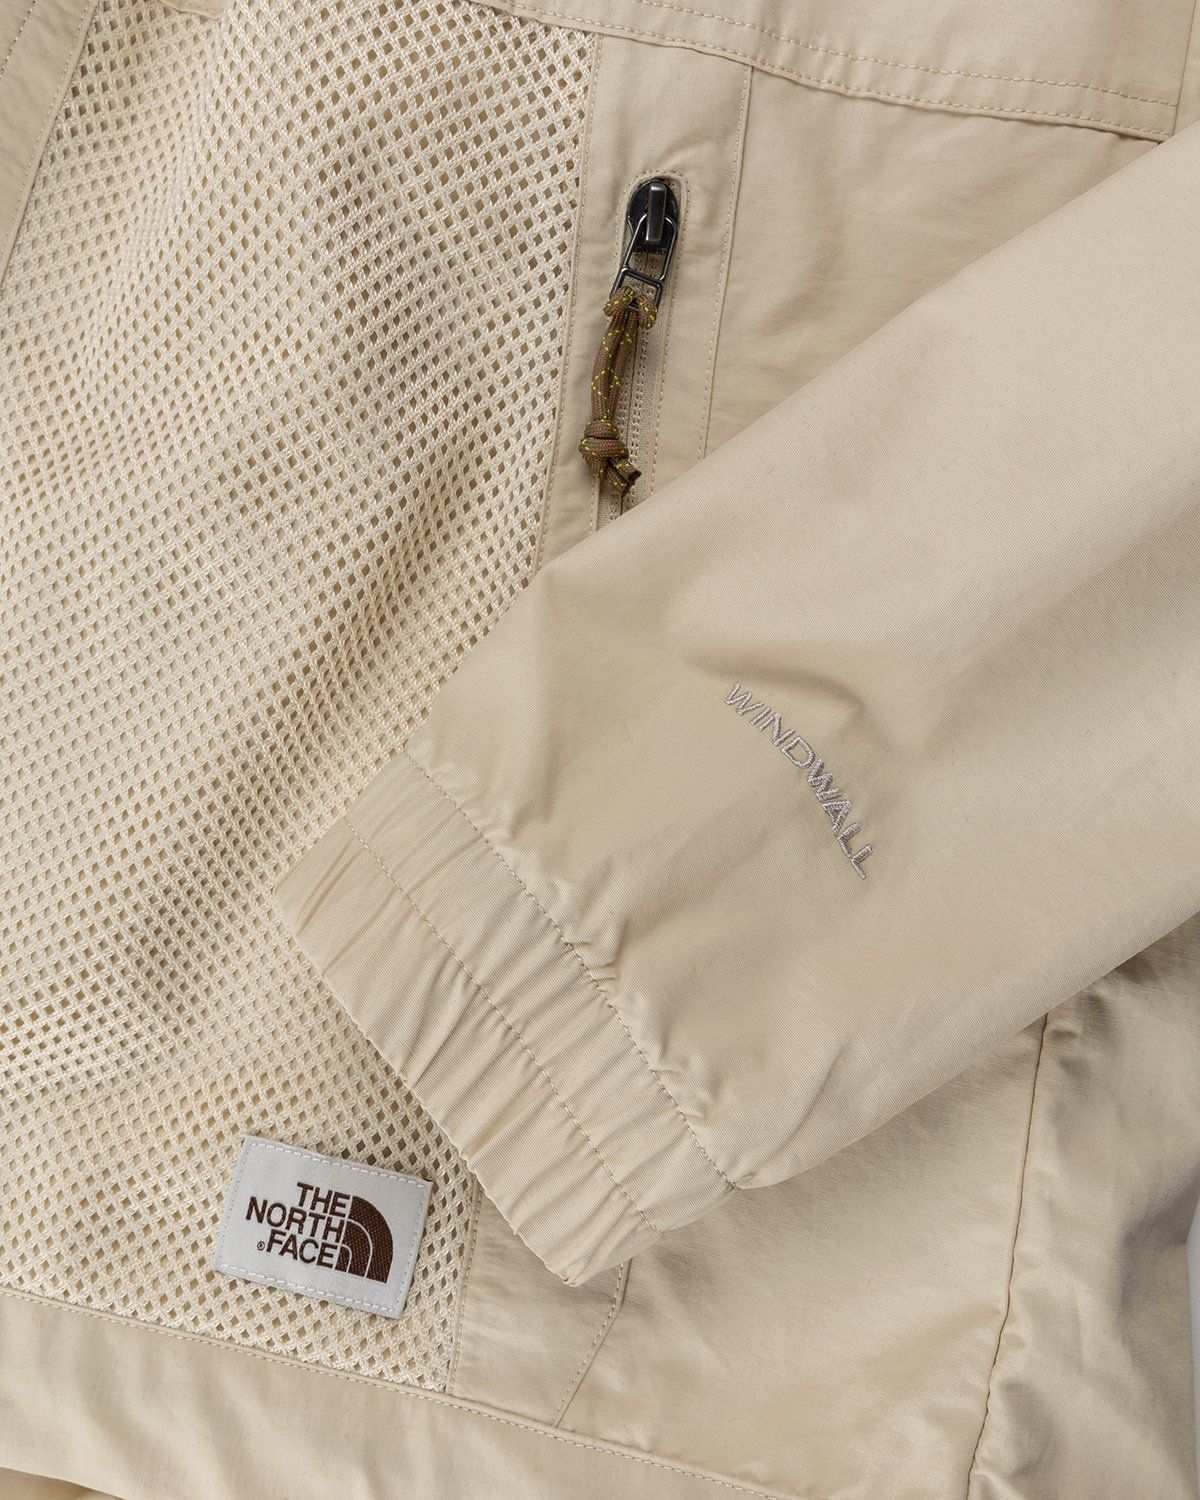 The North Face – Sky Valley Windbreaker Jacket Gravel - Outerwear - Beige - Image 6